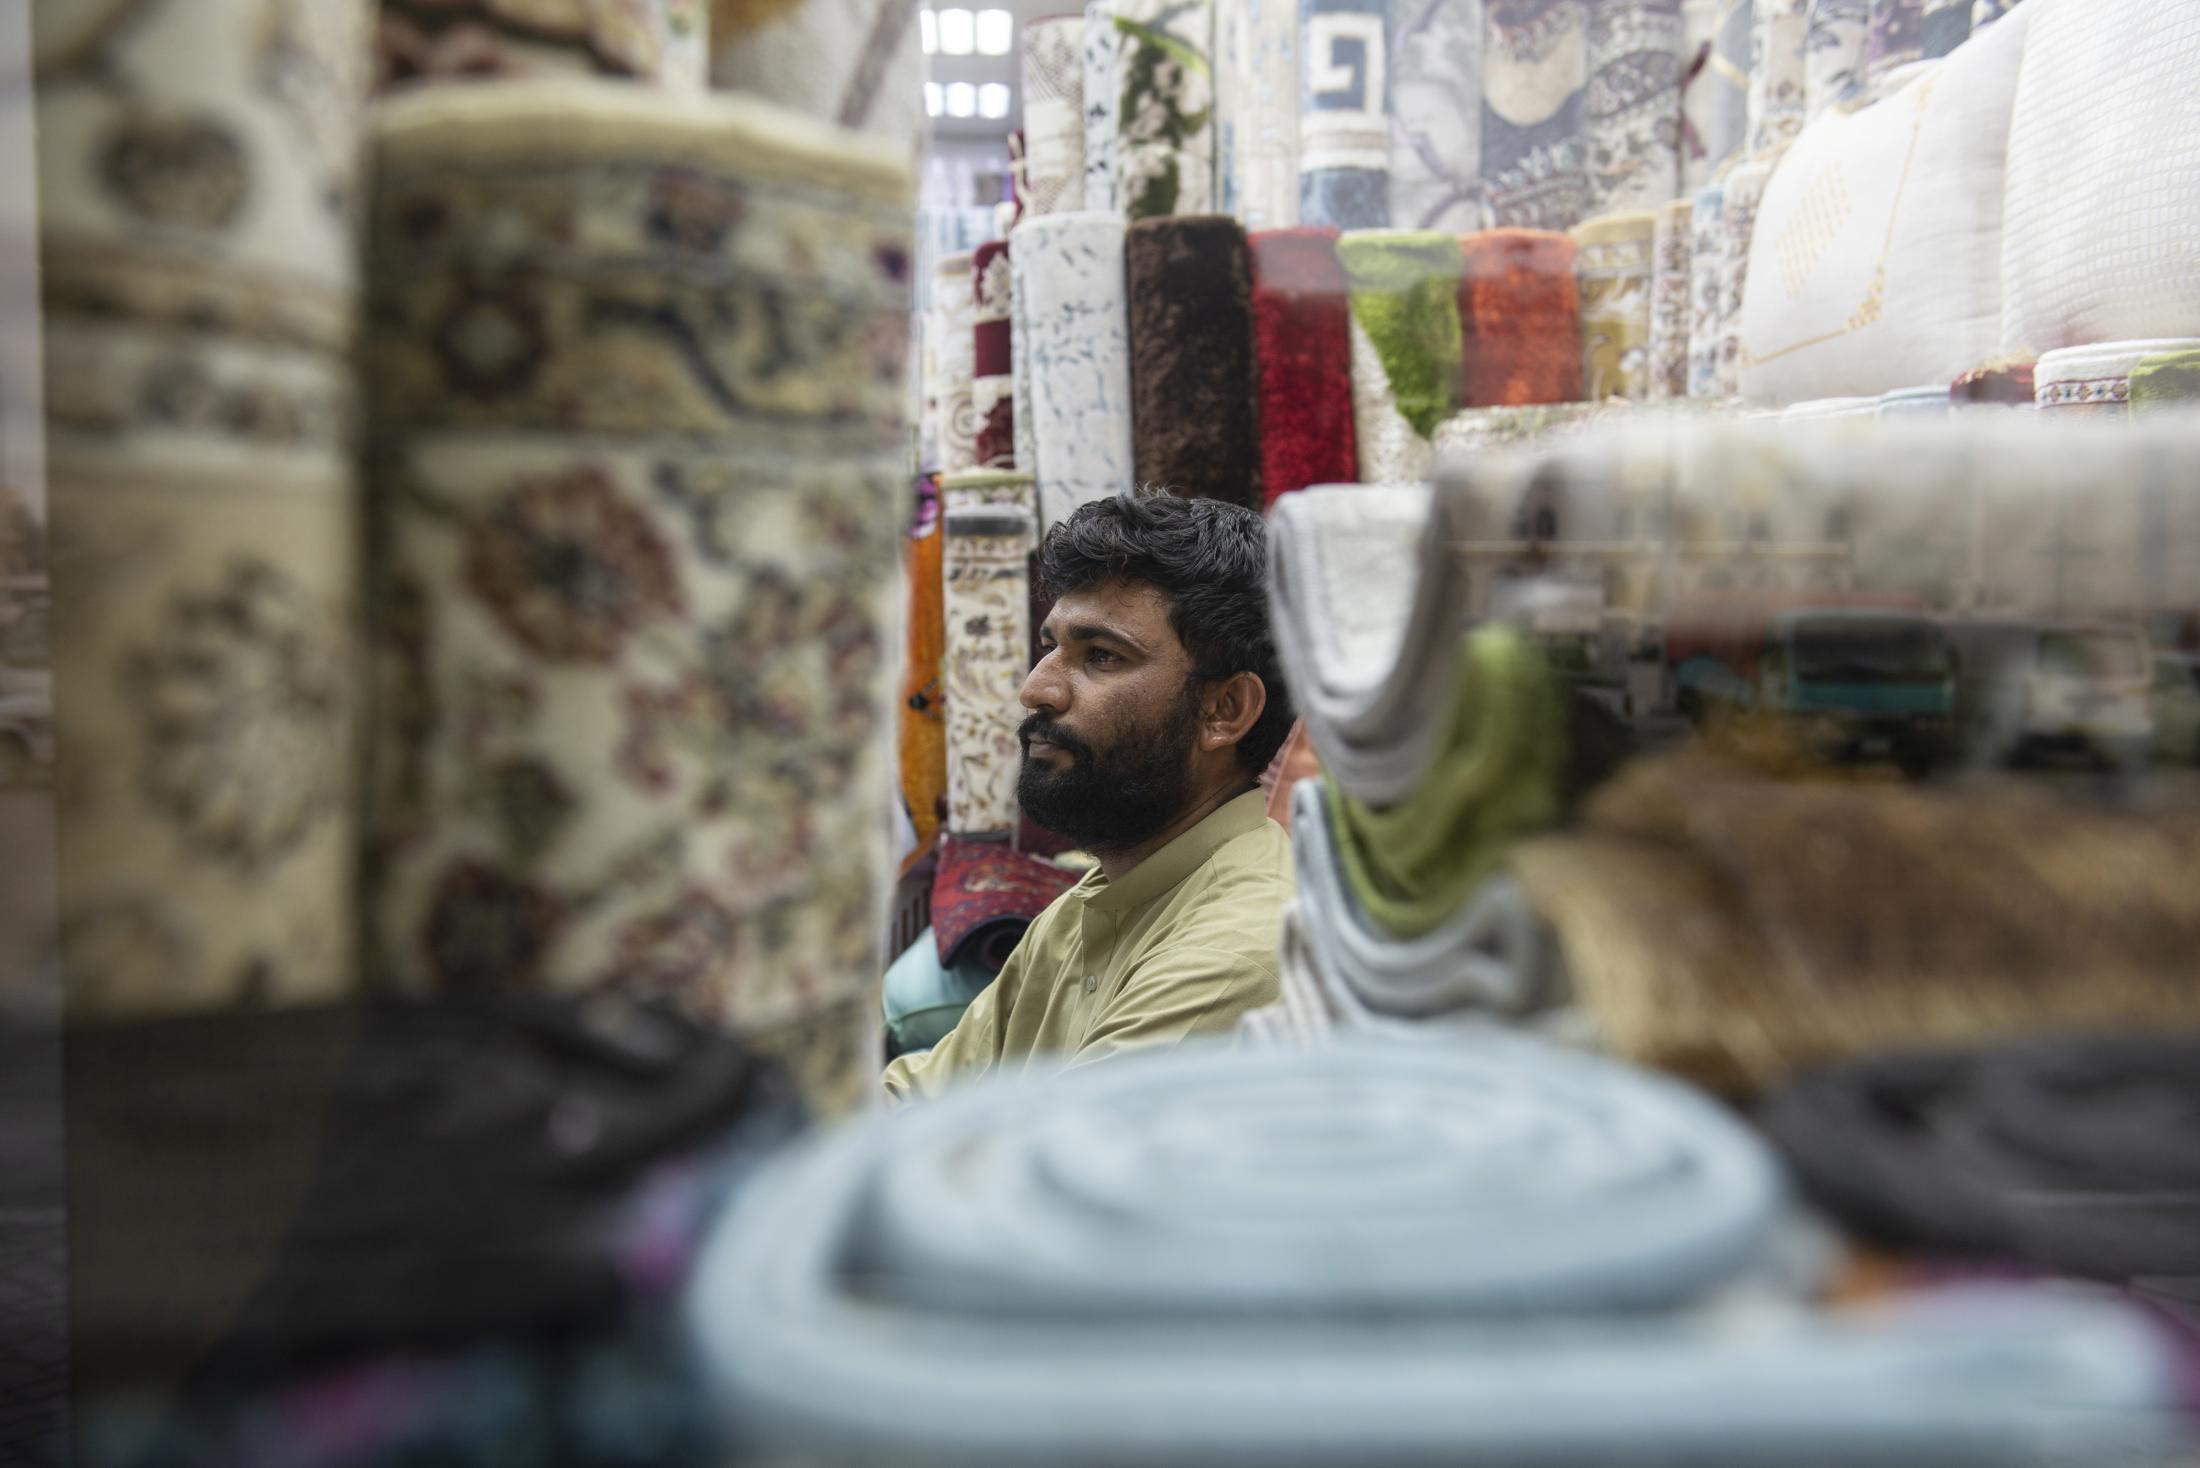 Art and Documentary Photography - Loading 23_The_Carpet_Shop_2641.jpg